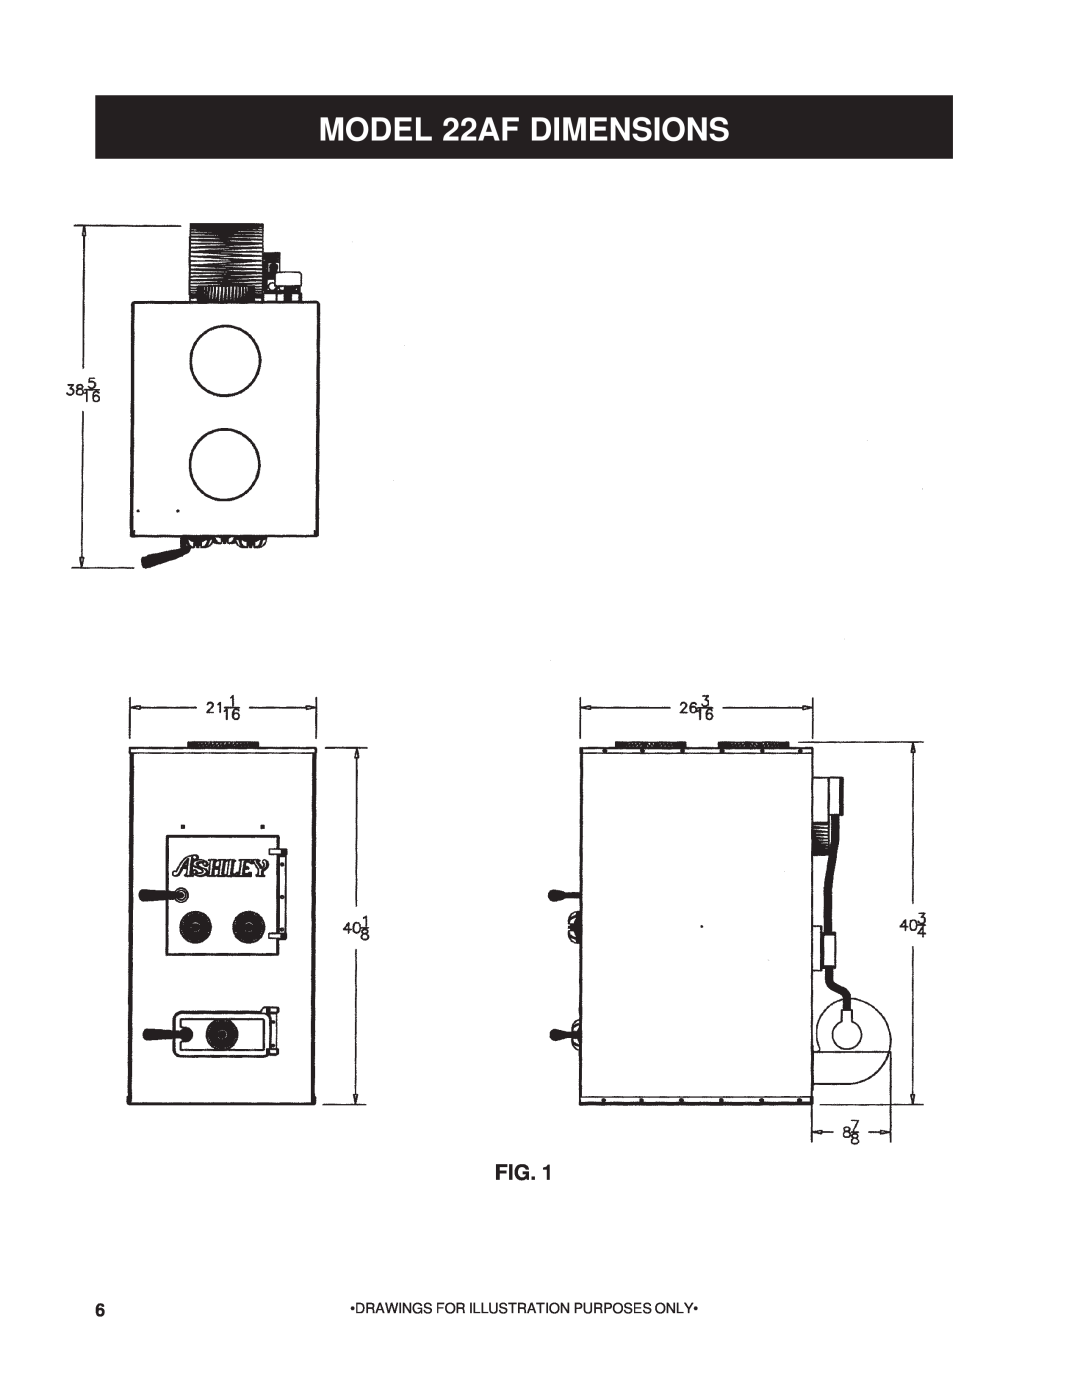 United States Stove owner manual MODEL 22AF DIMENSIONS, Drawings For Illustration Purposes Only 